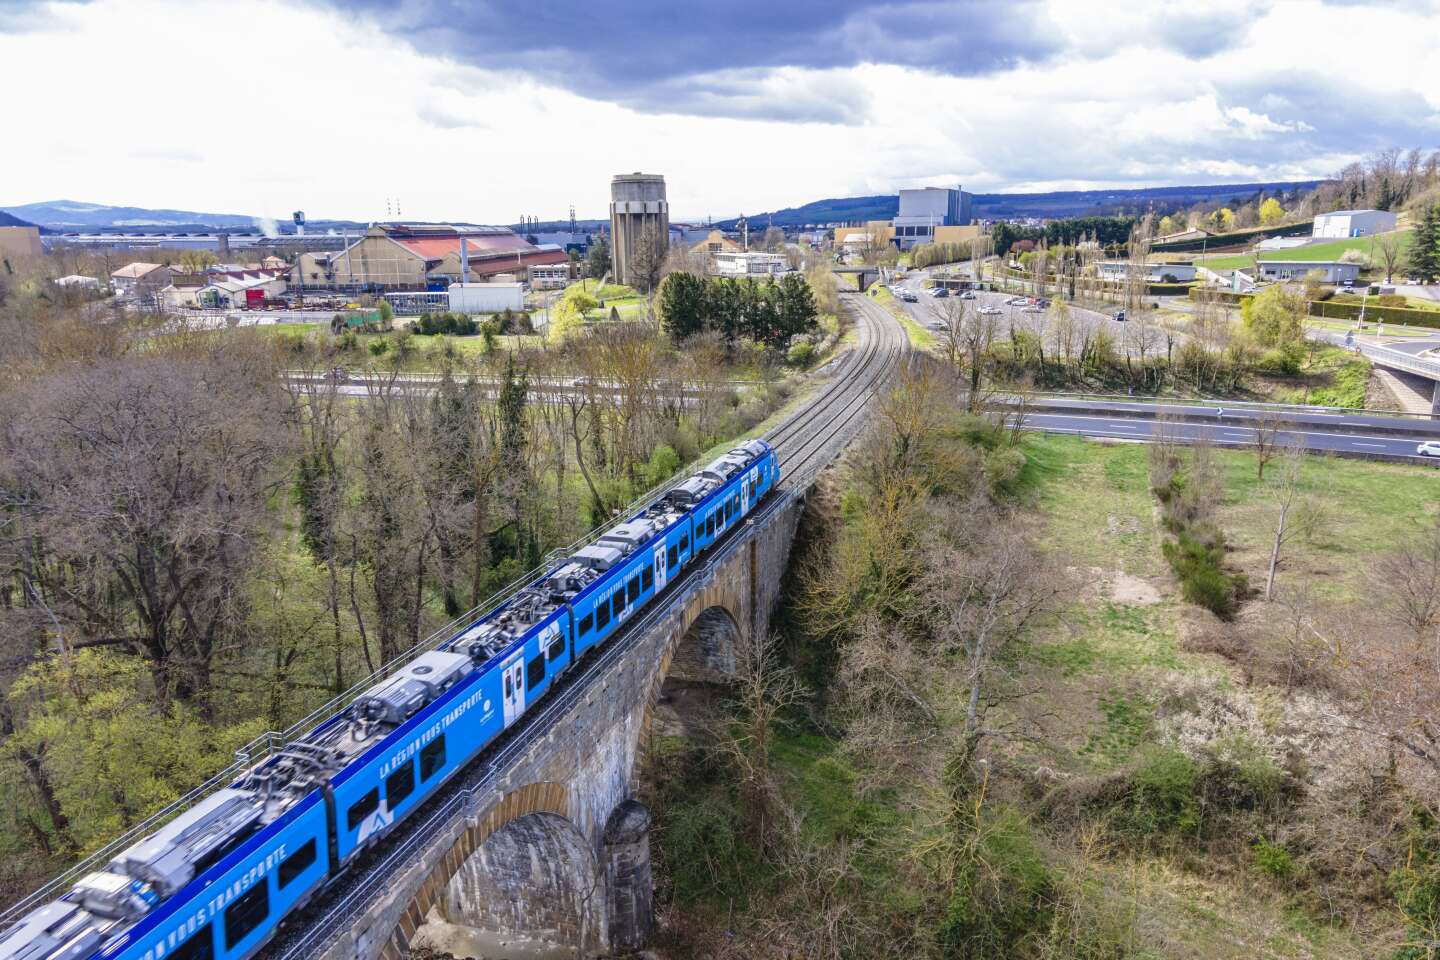 Italian rail group aims to launch high-speed links between European cities